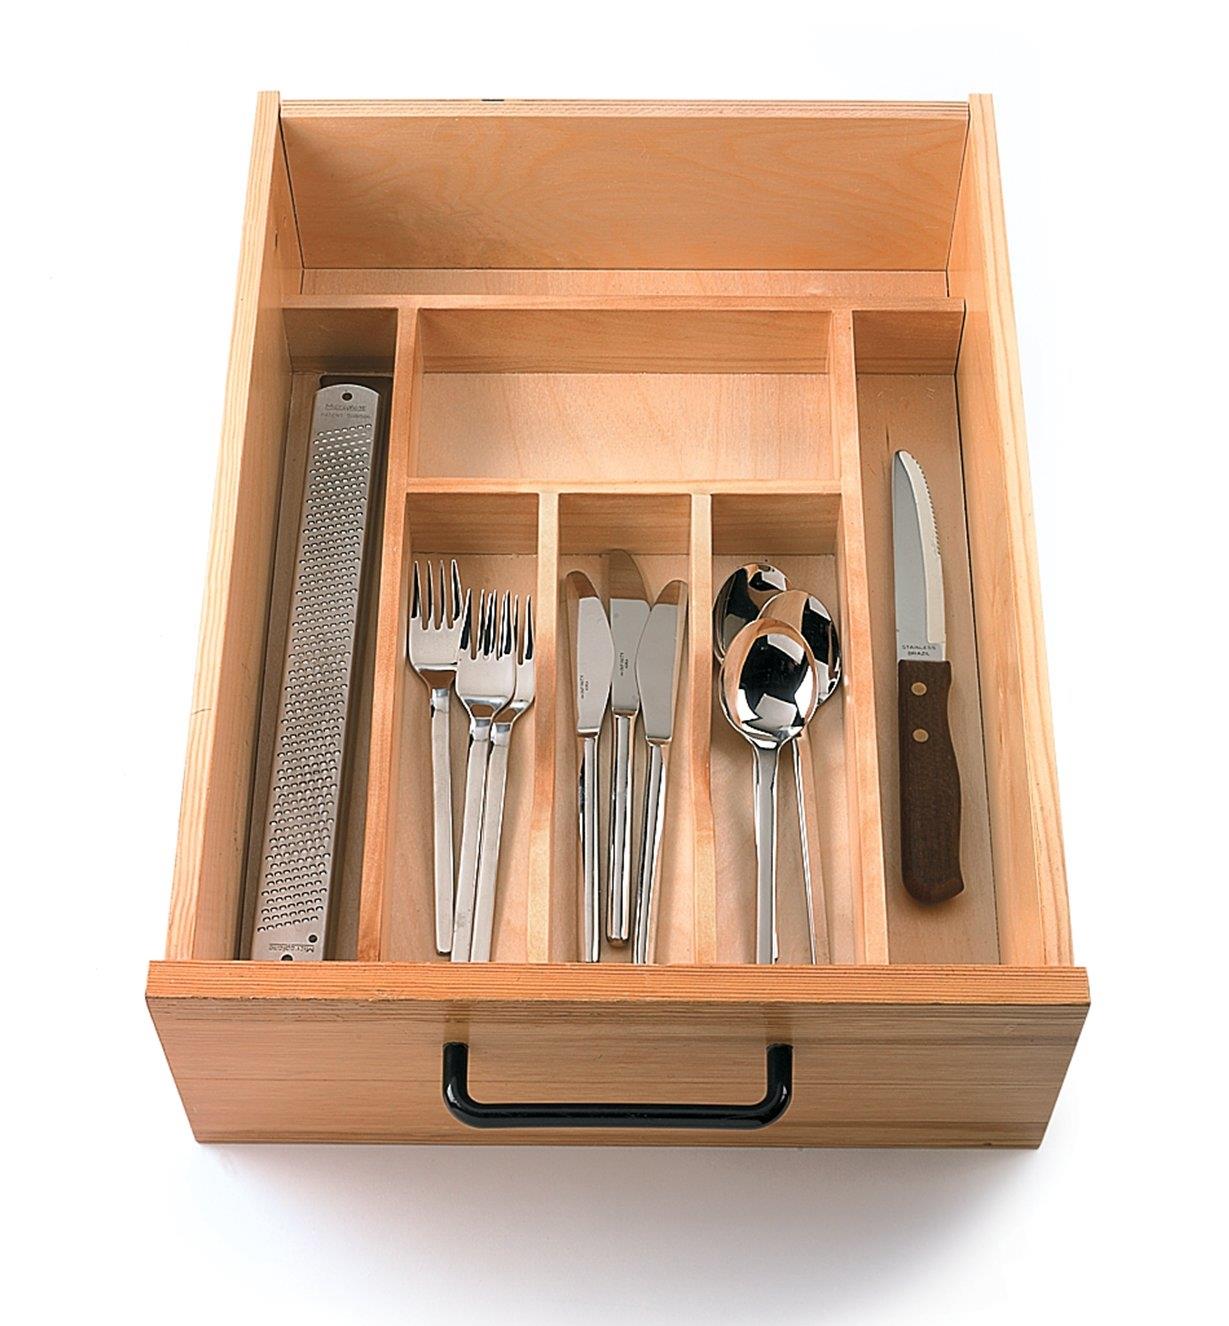 Small tray in drawer, filled with utensils